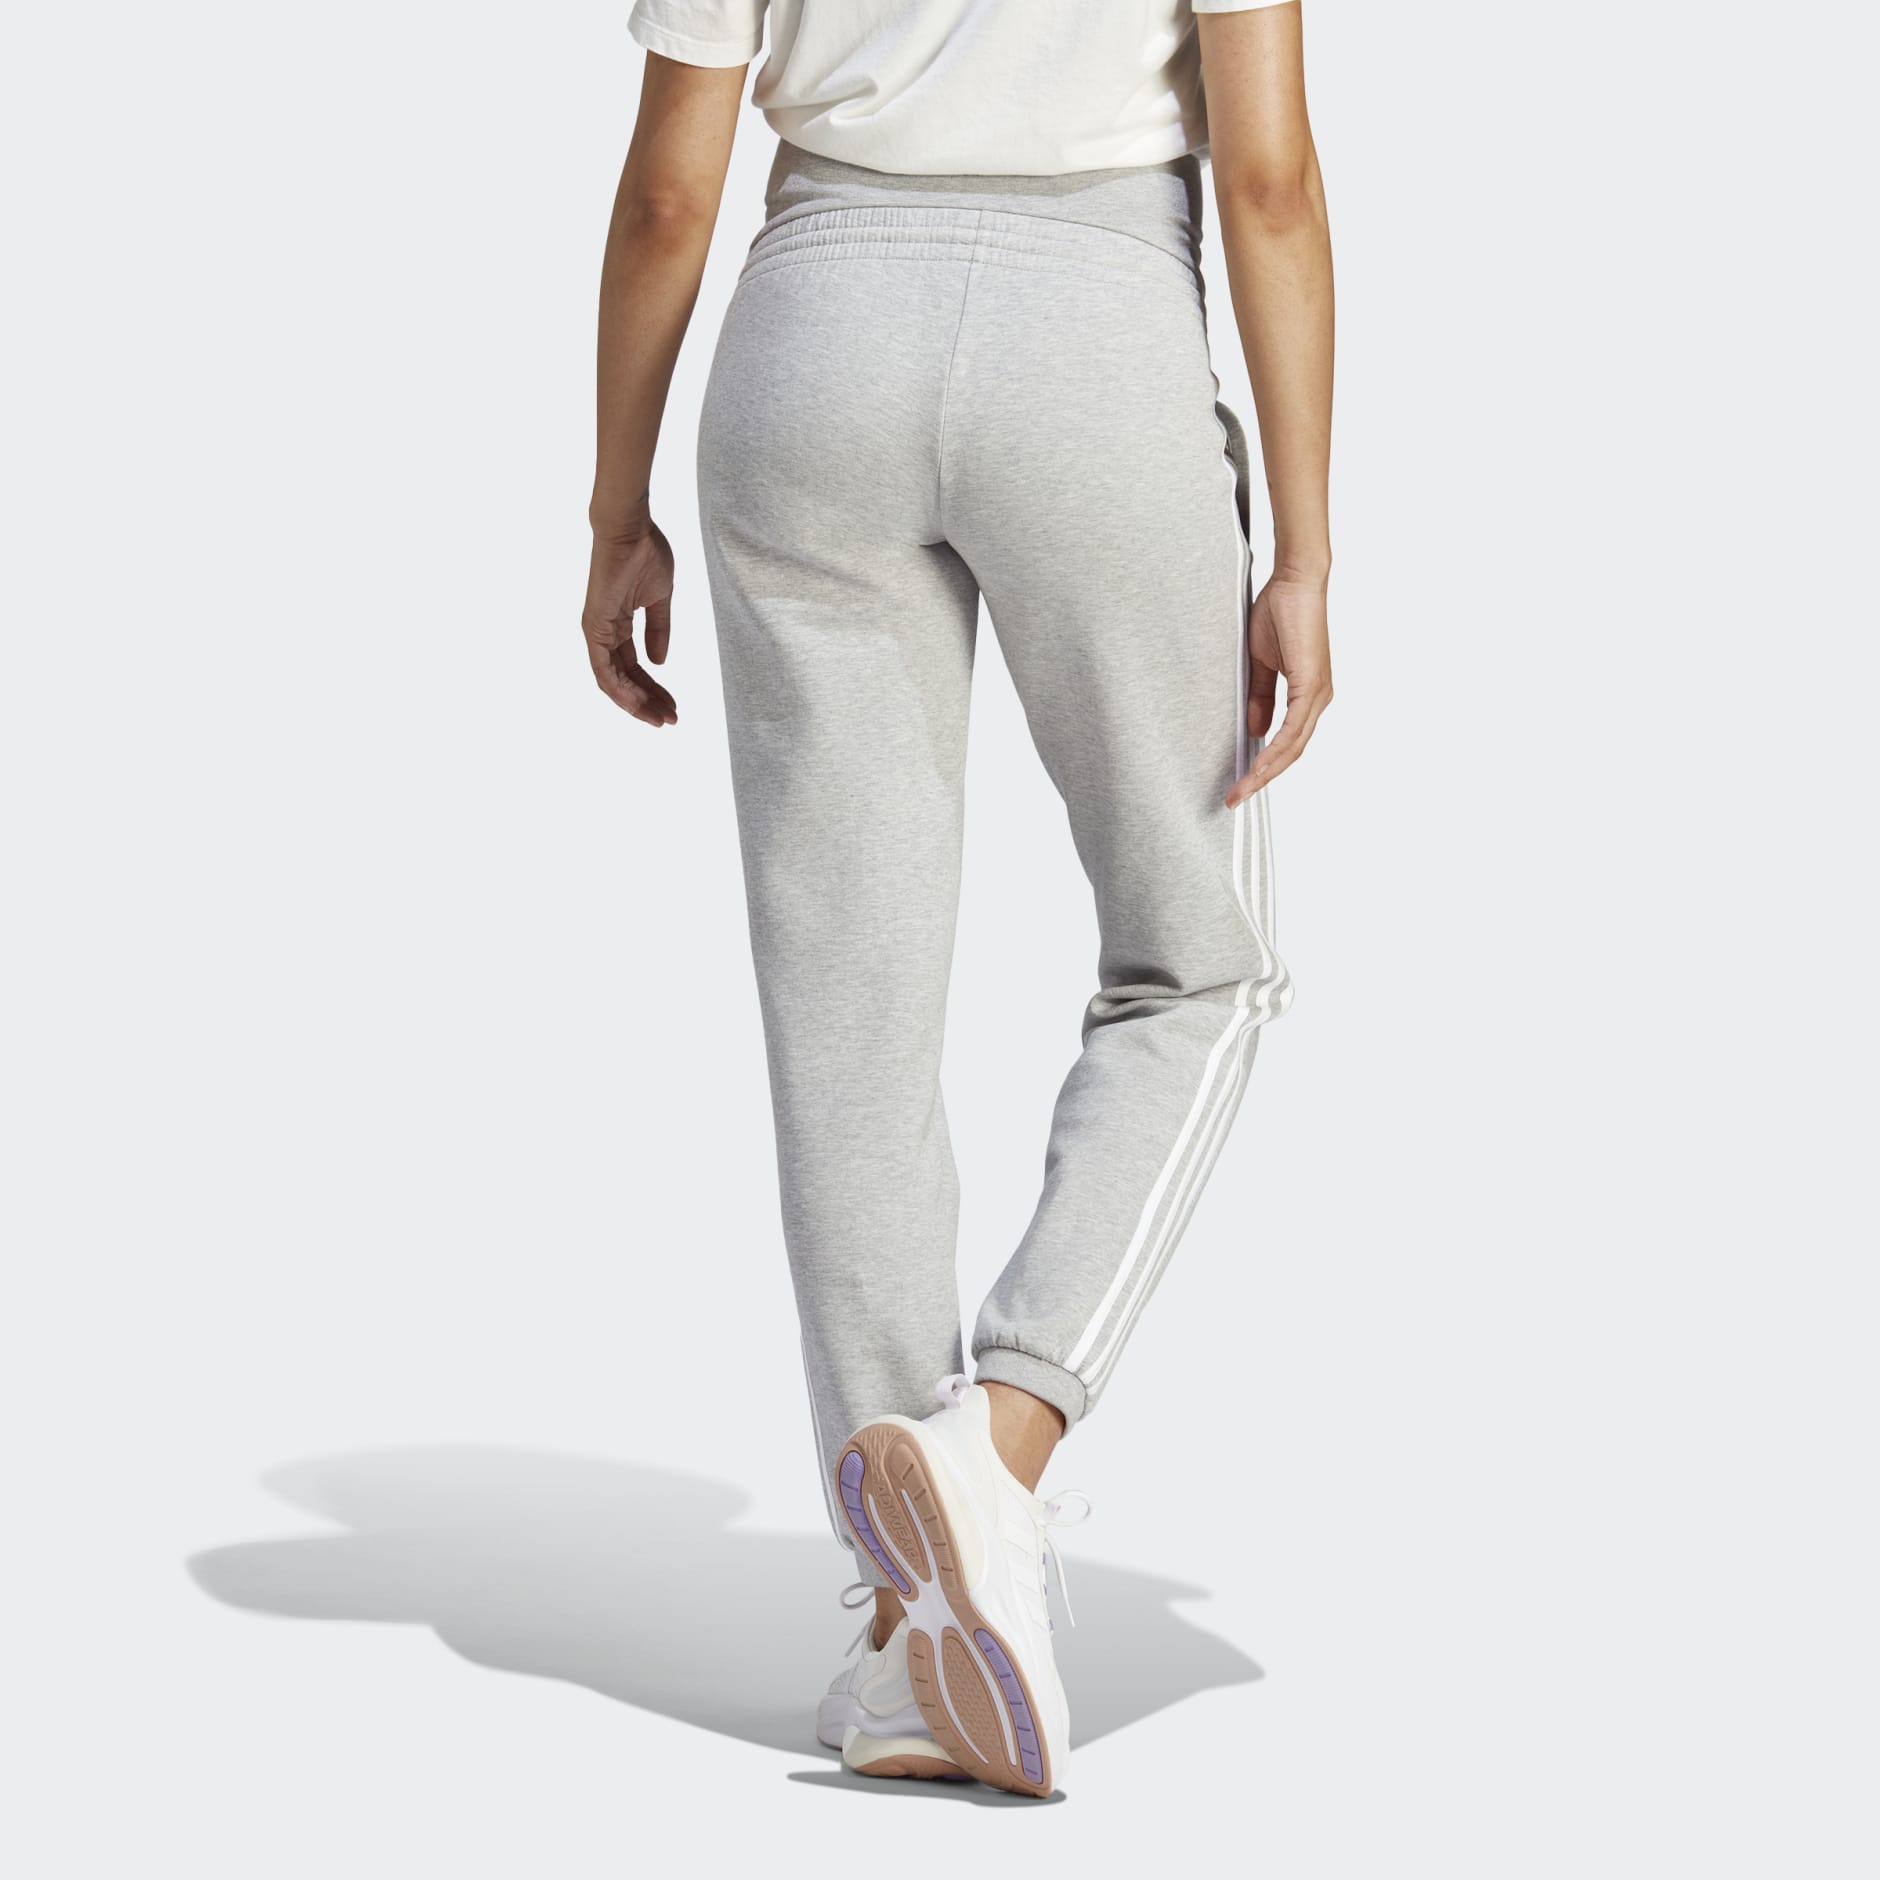 Buy The Mom Store Maternity Track Pants | Cotton | Pre and Post Pregnancy |  Stylish | Lounge Wear | Elasticated Waist Band | Banana Crepe | S Cream at  Amazon.in